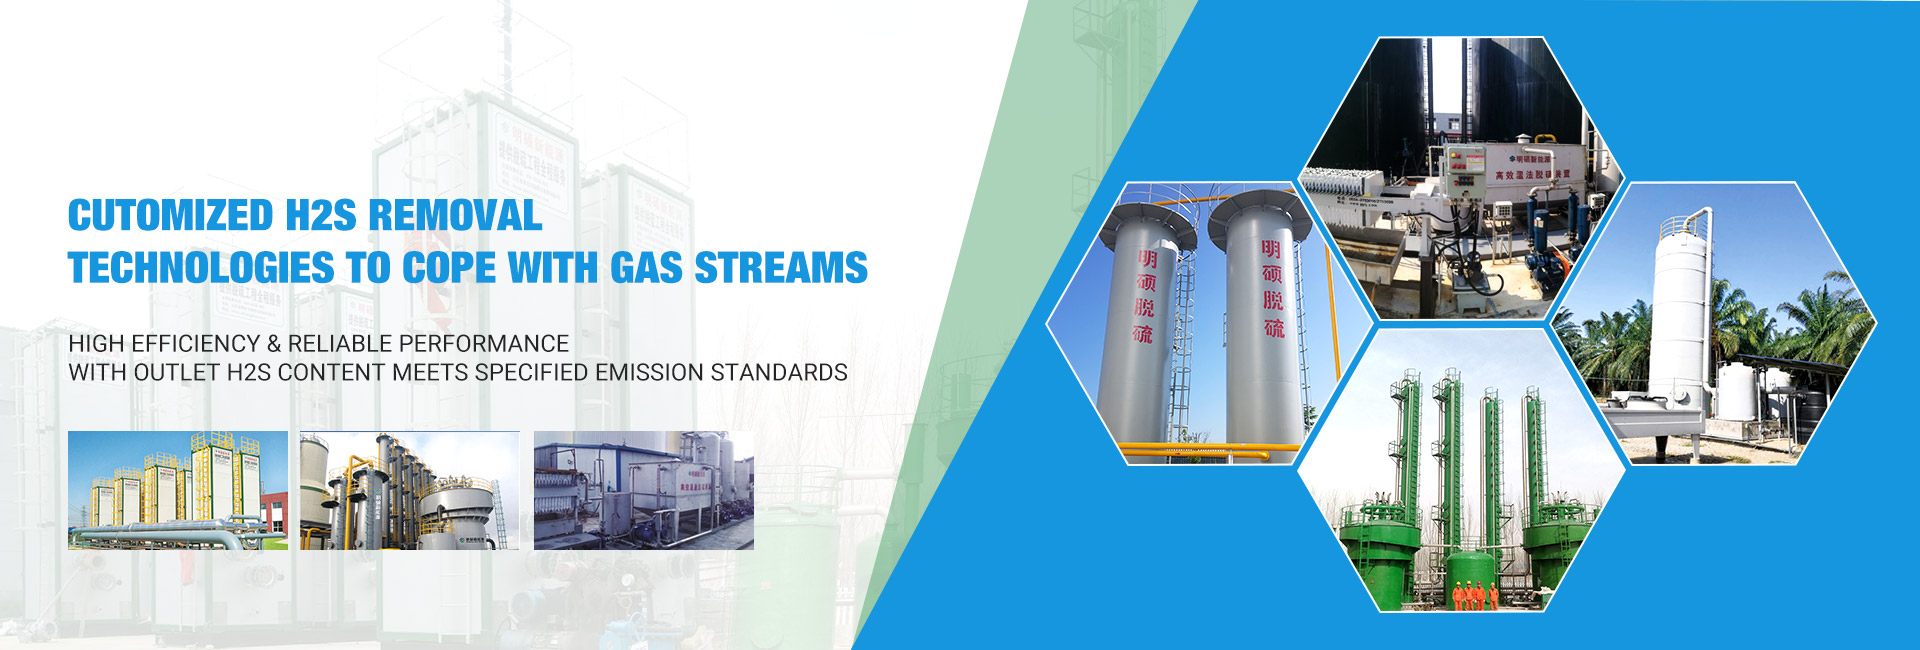 Cutomized H2S Removal Technologies to Cope with Gas Streams